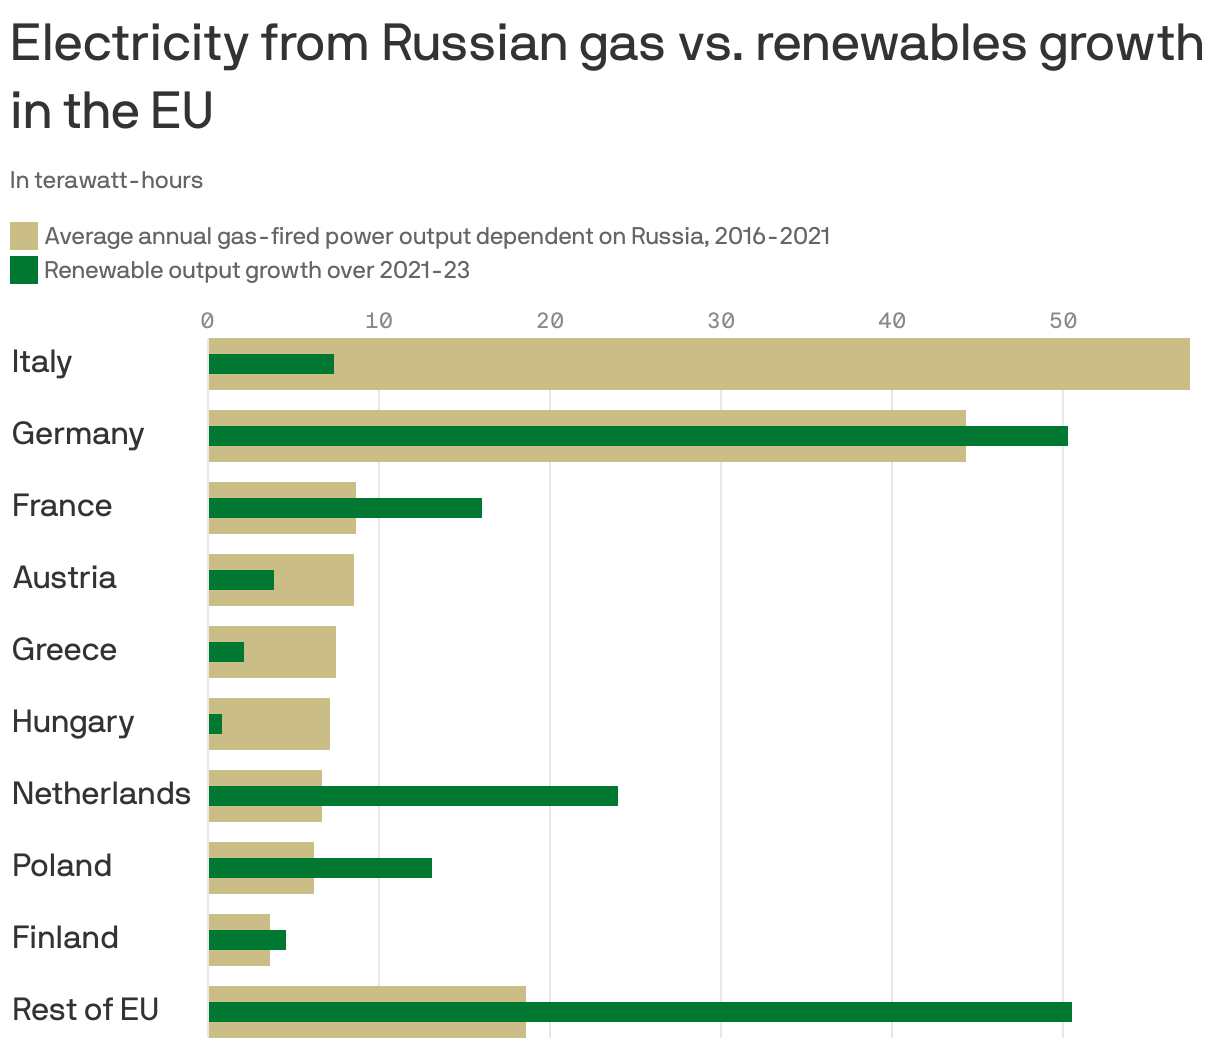 Electricity from Russian gas vs. renewables growth in the EU